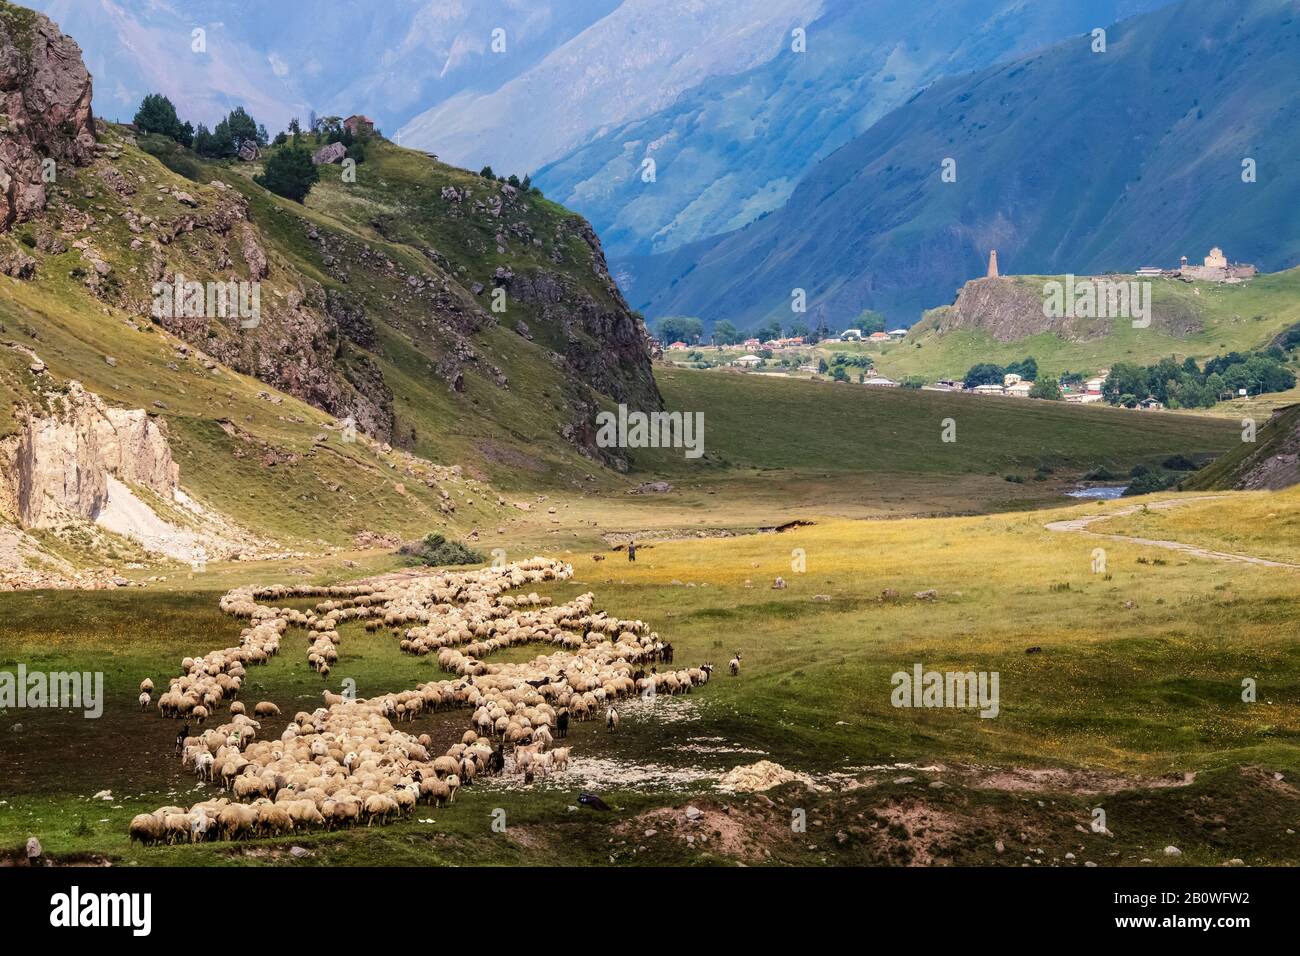 Herd of sheep and goats grazing in the mountains with shepherd and dog and fortified church and village in background and house with cross high on a h Stock Photo